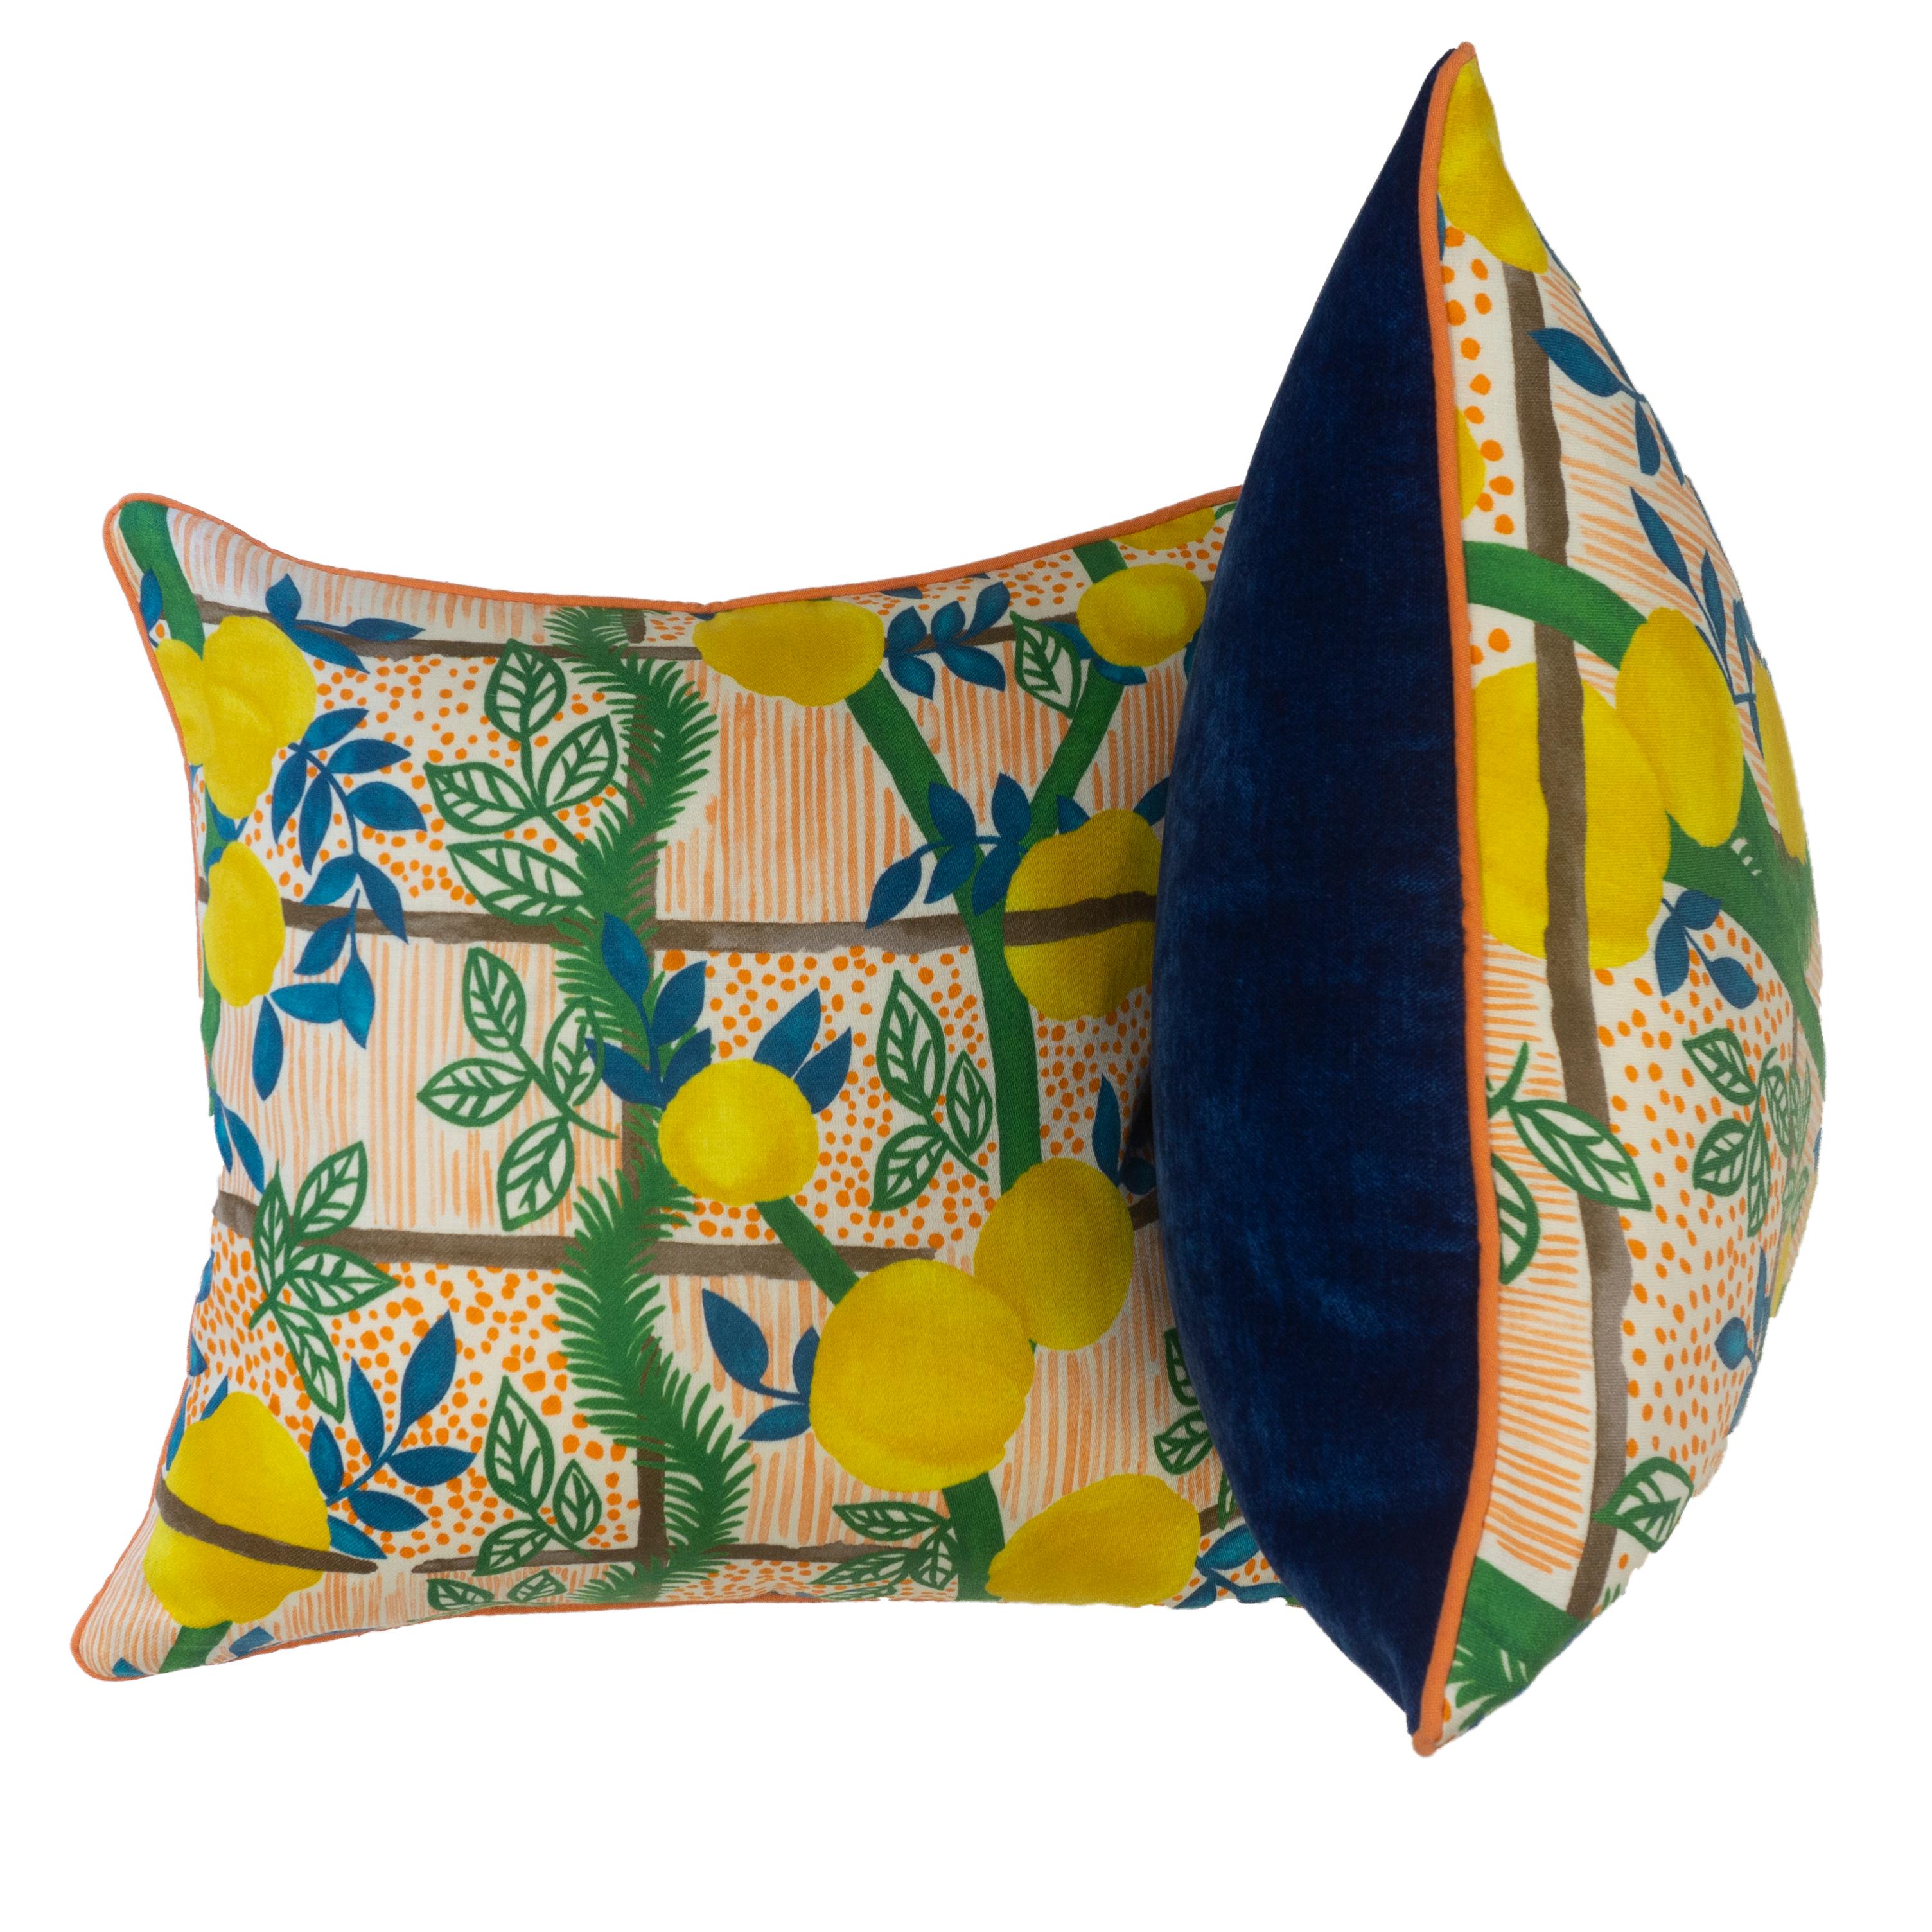 This vibrant Jim Thompson fabric features bright primary colors with a lemon tree pattern. The back is sewn in navy blue velvet bordered in orange piping.

All pillows are hand sewn at our studio in Norwalk, Connecticut. 

Measurements:

17” H